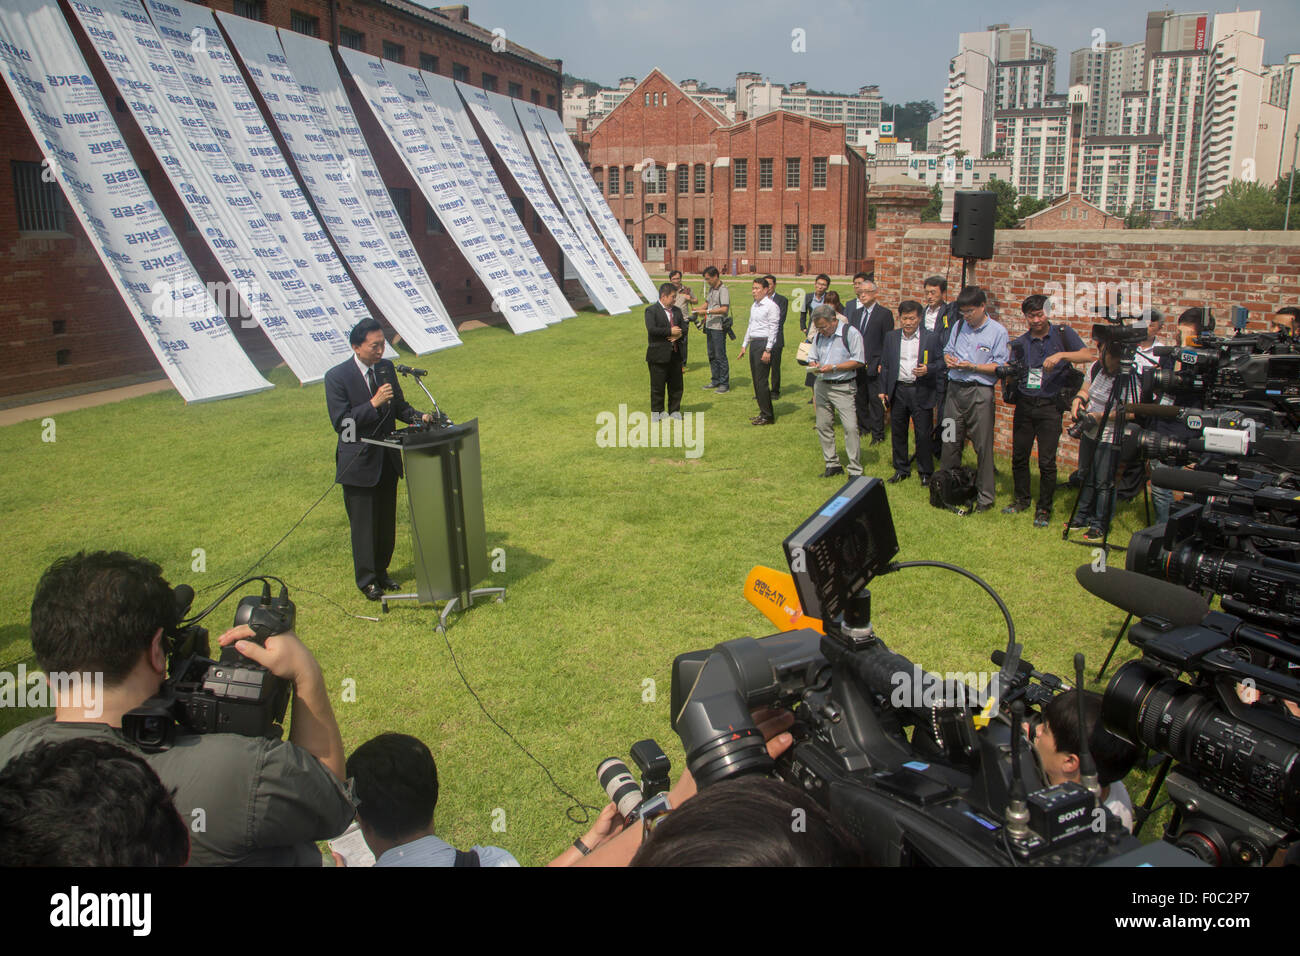 Yukio Hatoyama, Aug 12, 2015 : Japan's former Prime Minister Yukio Hatoyama speaks during his visit to the Seodaemun Prison History Hall in Seoul, South Korea. The Seodaemun Prison History Hall was a prison where Japan had imprisoned Korean fighters for independence during Japan's colonial rule of Korea from 1910-1945. Credit:  Lee Jae-Won/AFLO/Alamy Live News Stock Photo